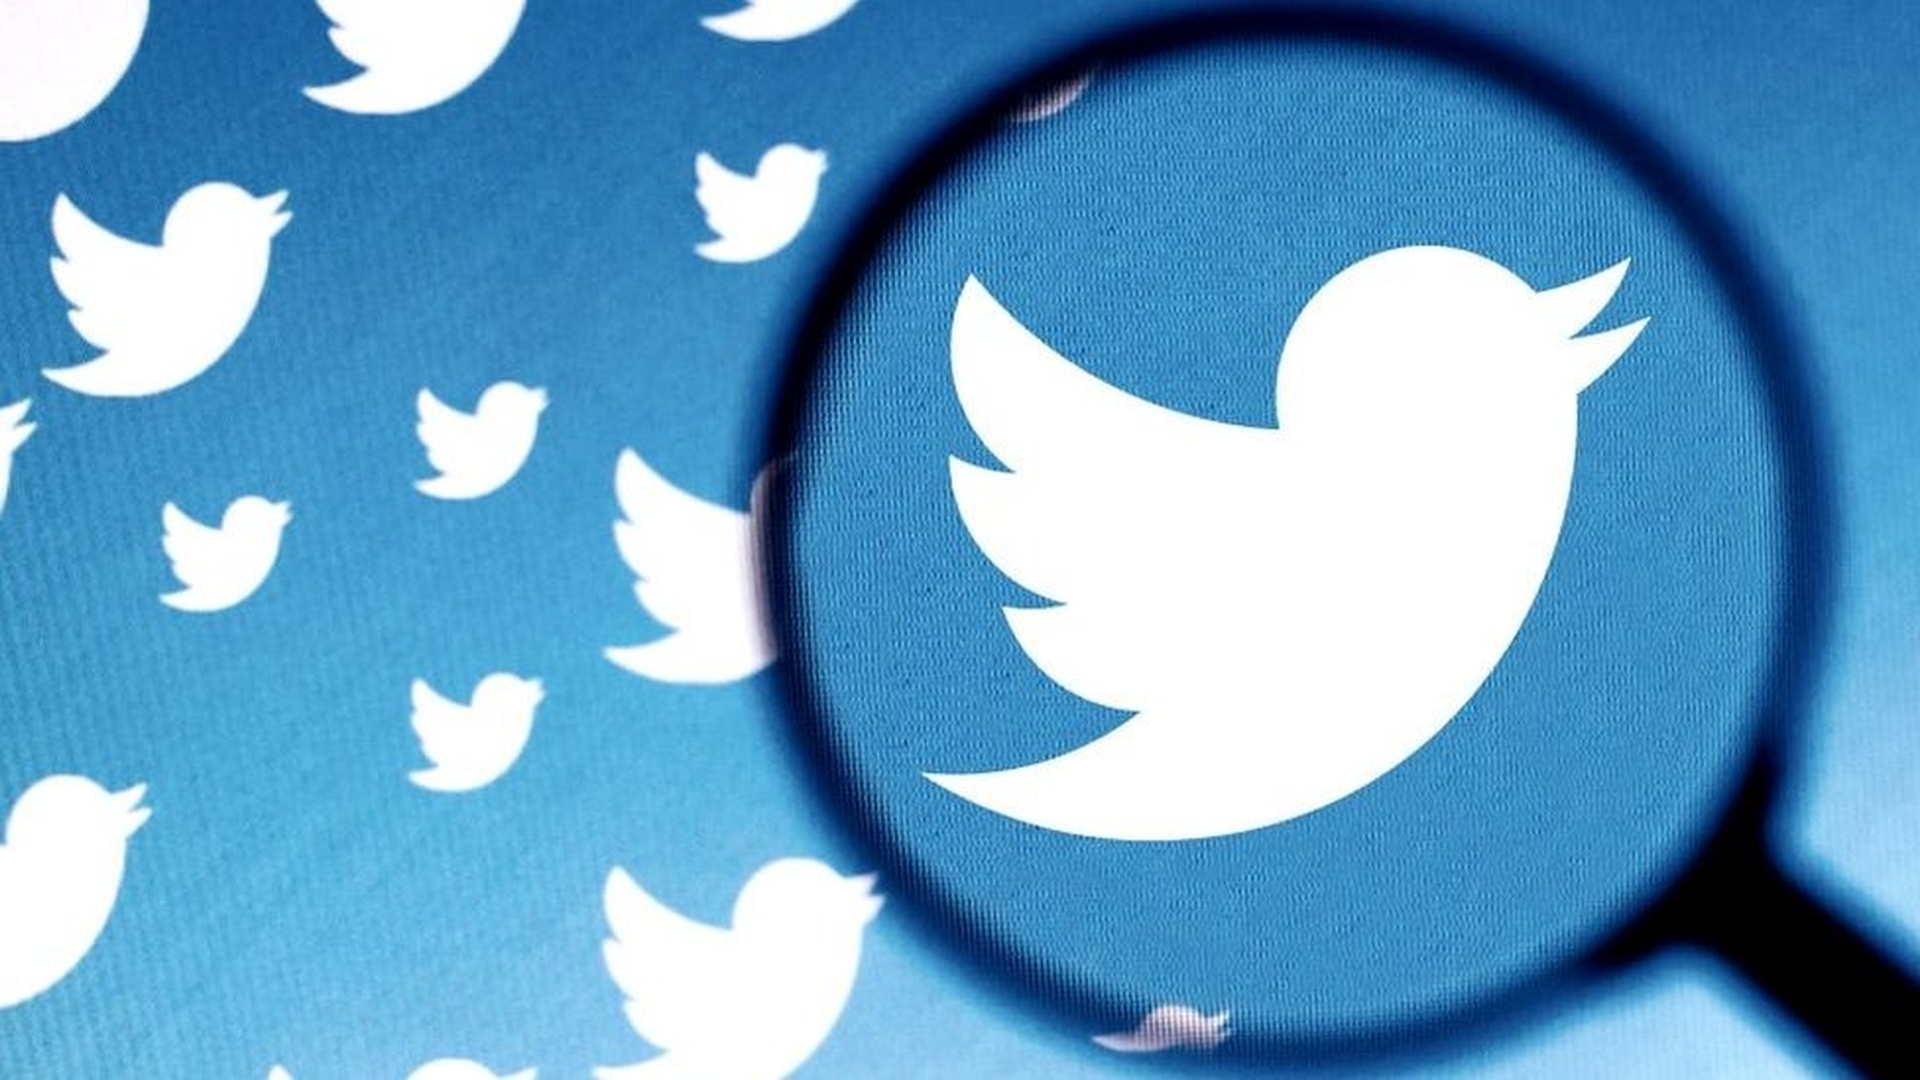 In this article, we will cover Twitter to pay 150M dollars over privacy violations, after using users' security data to target ads, violating a 2011 order by the Federal Trade Commission.